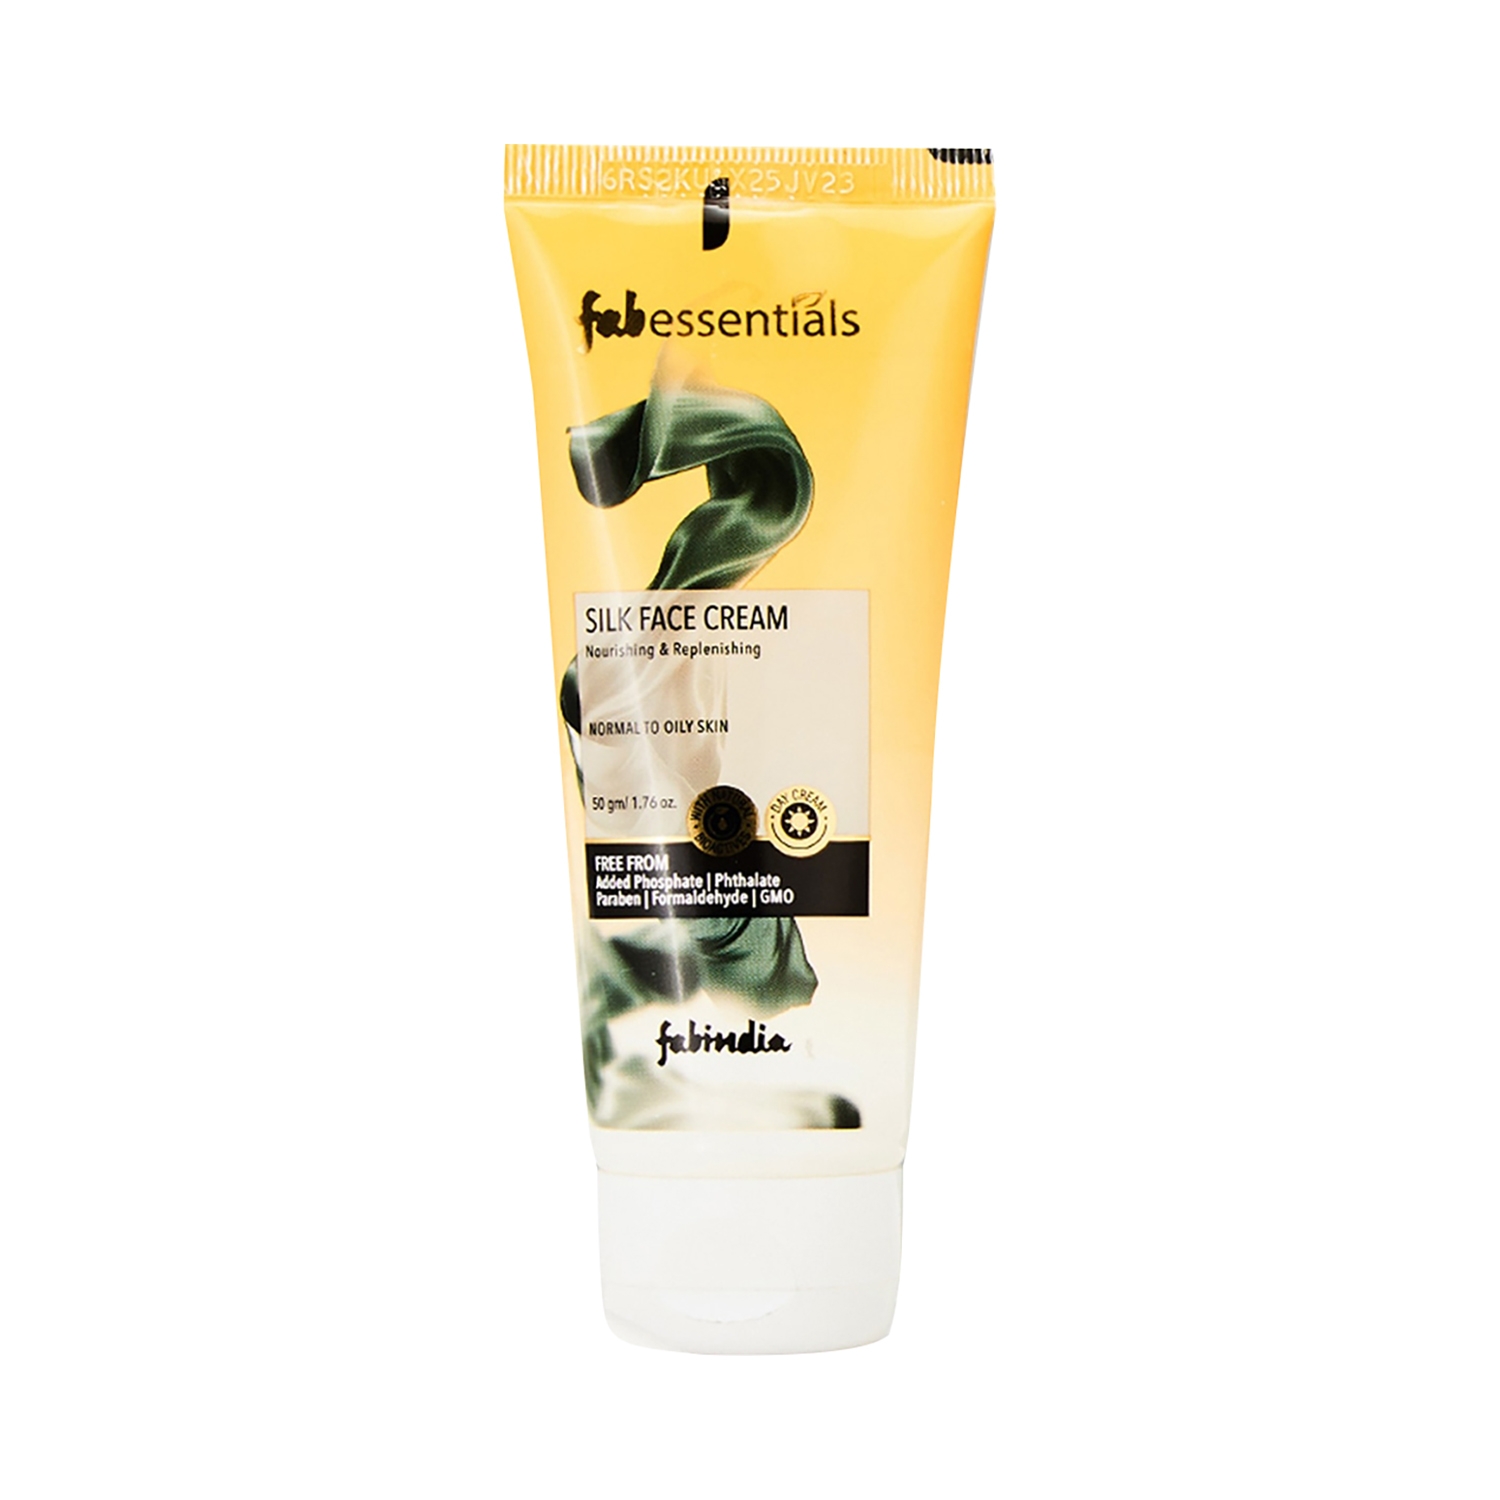 Fabessentials by Fabindia | Fabessentials by Fabindia Silk Face Cream (50g)